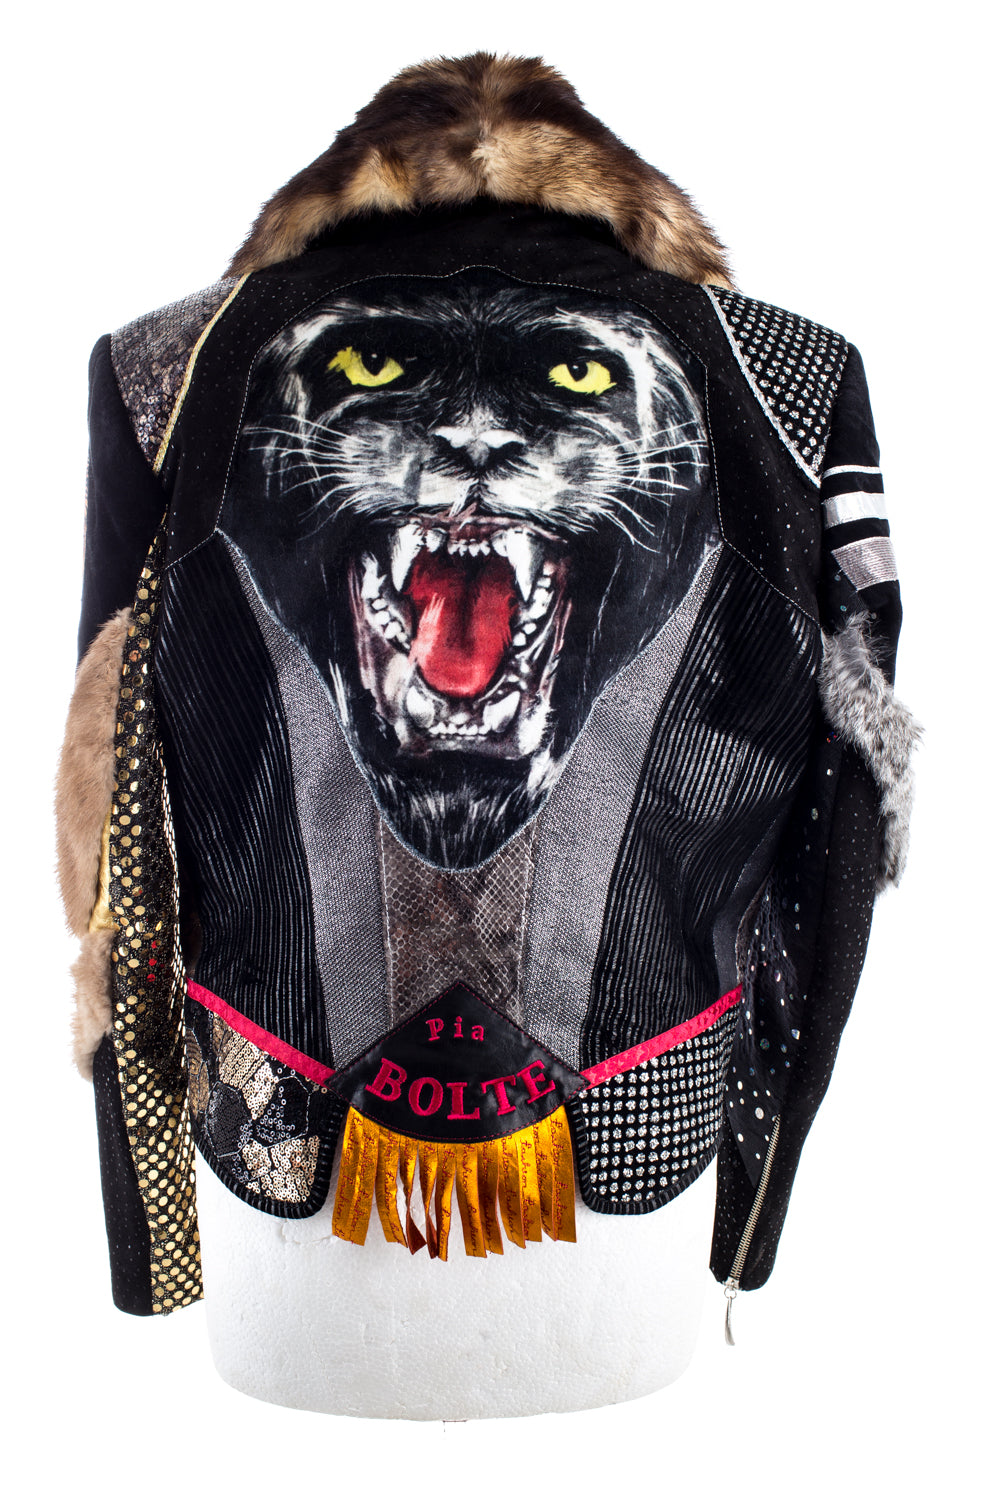 PIA BOLTE® PANTHER - PIA BOLTE® COUTURE